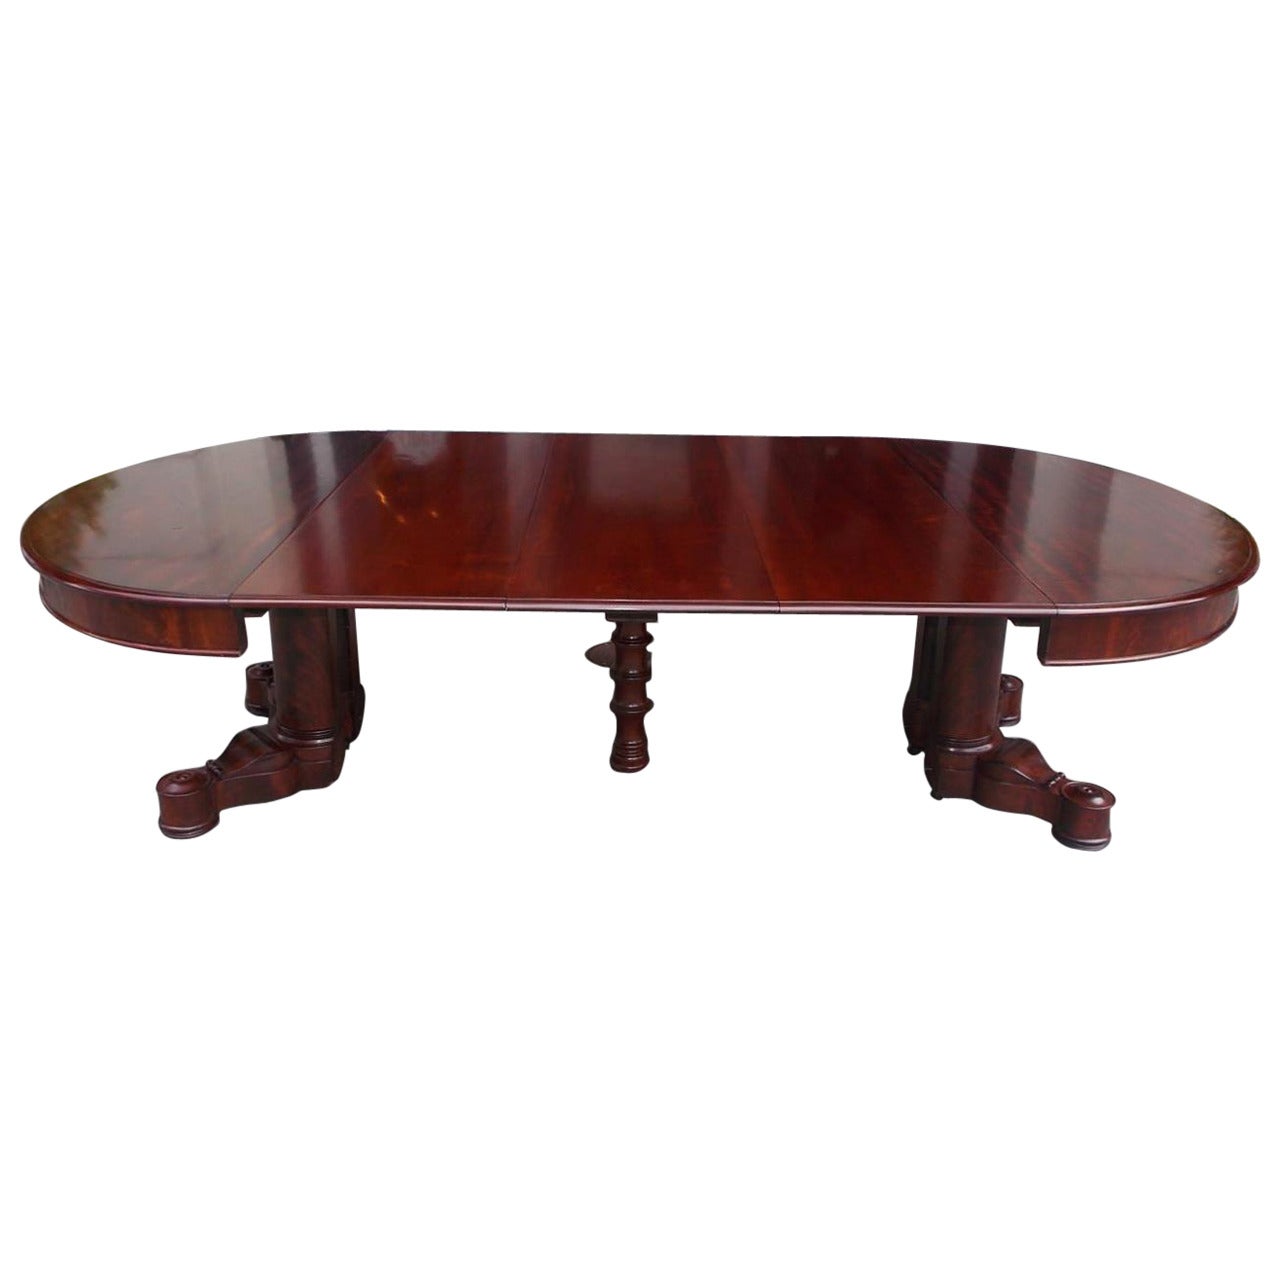 American Classical Mahogany Dining Table with Console Table, Boston Circa 1830 For Sale